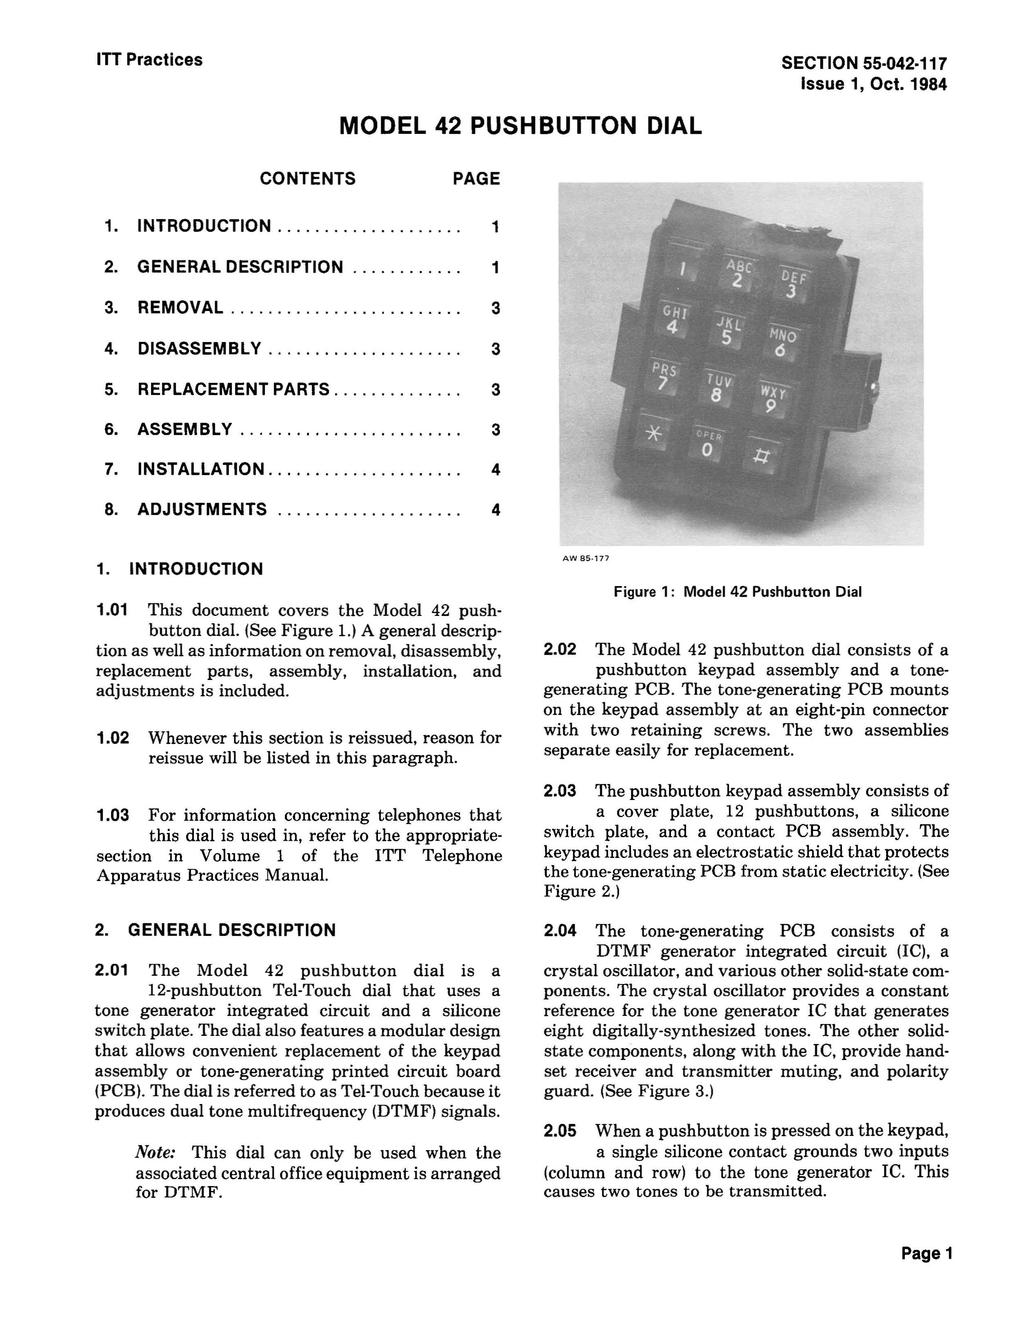 ITT Practices SECTION 55 042 117 Issue 1, Oct. 1984 MODEL 42 PUSHBUTTON DIAL CONTENTS PAGE 1. INTRODUCTION... 1 2. GENERAL DESCRIPTION............ 1 3. REMOVAL... 3 4. DiSASSEMBLy... 3 5.